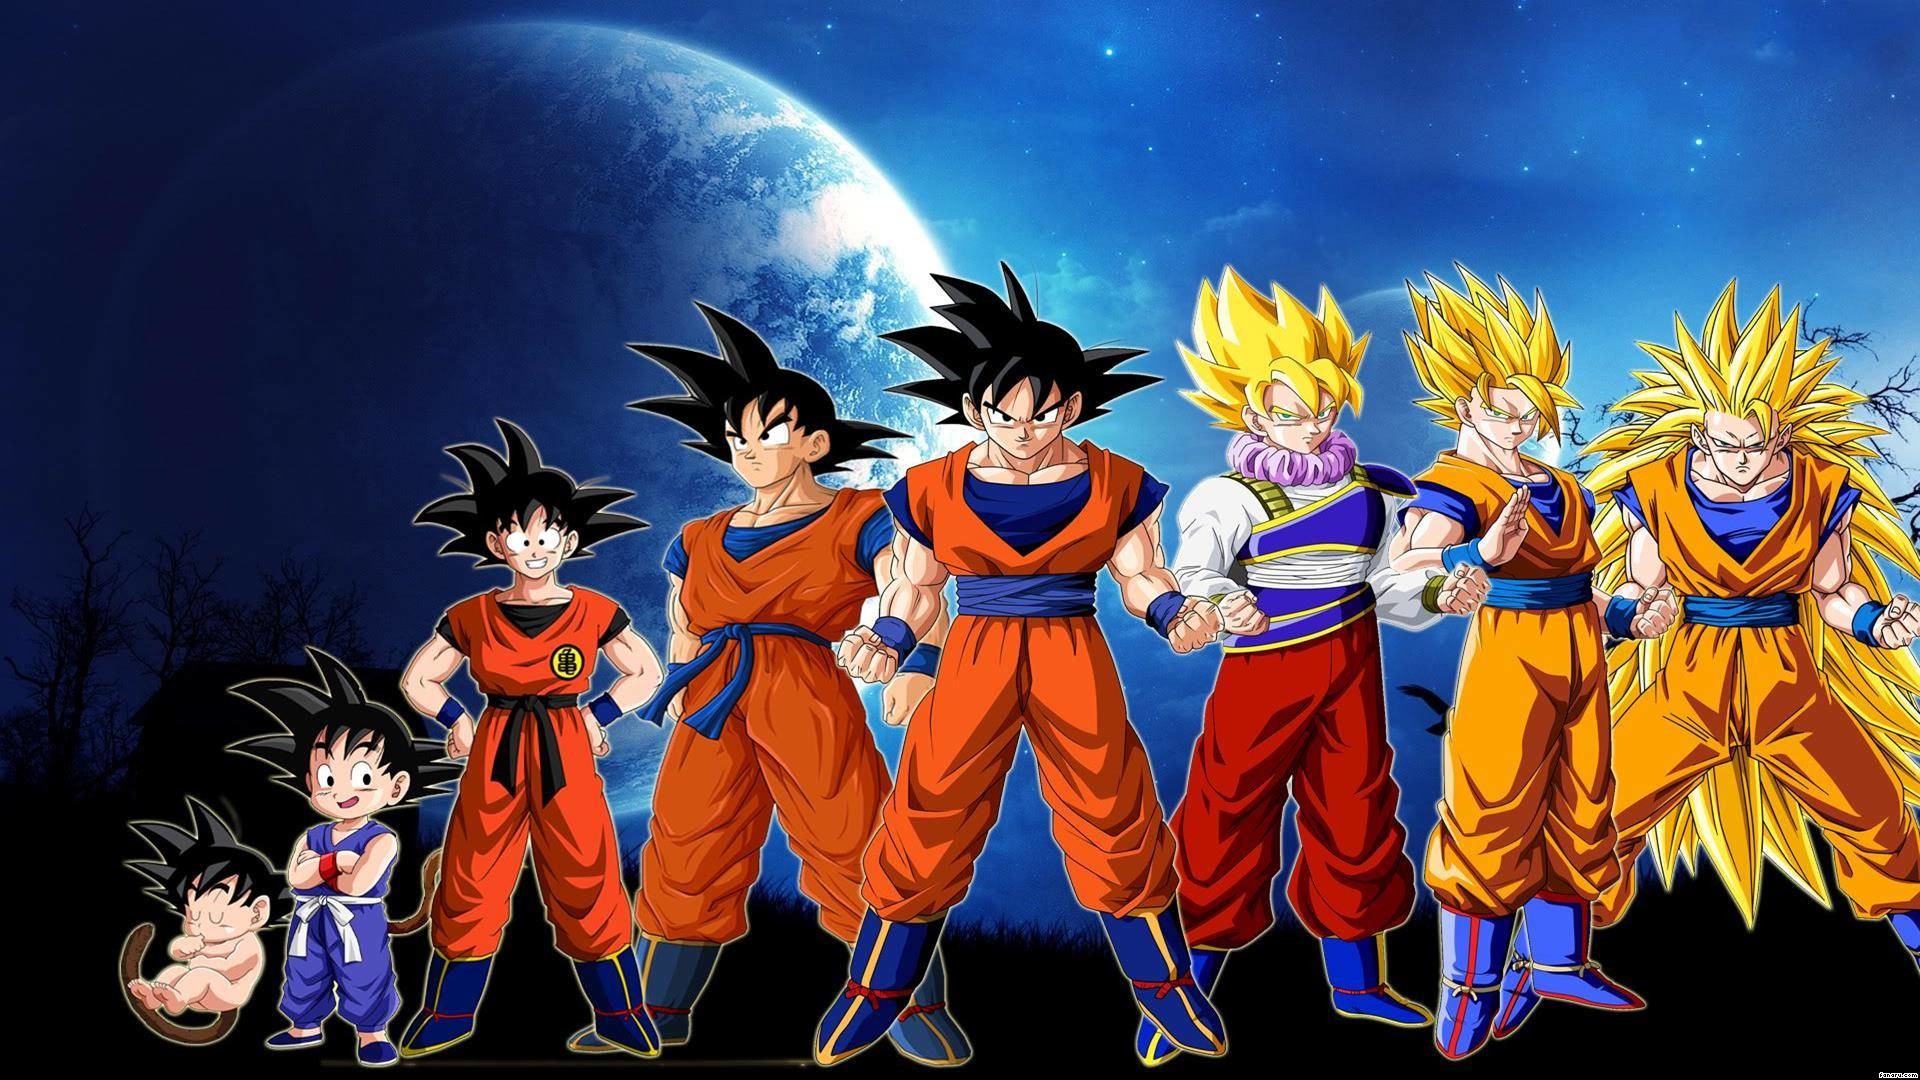 1920x1080 Dragon Ball Z Wallpapers | Best Wallpapers